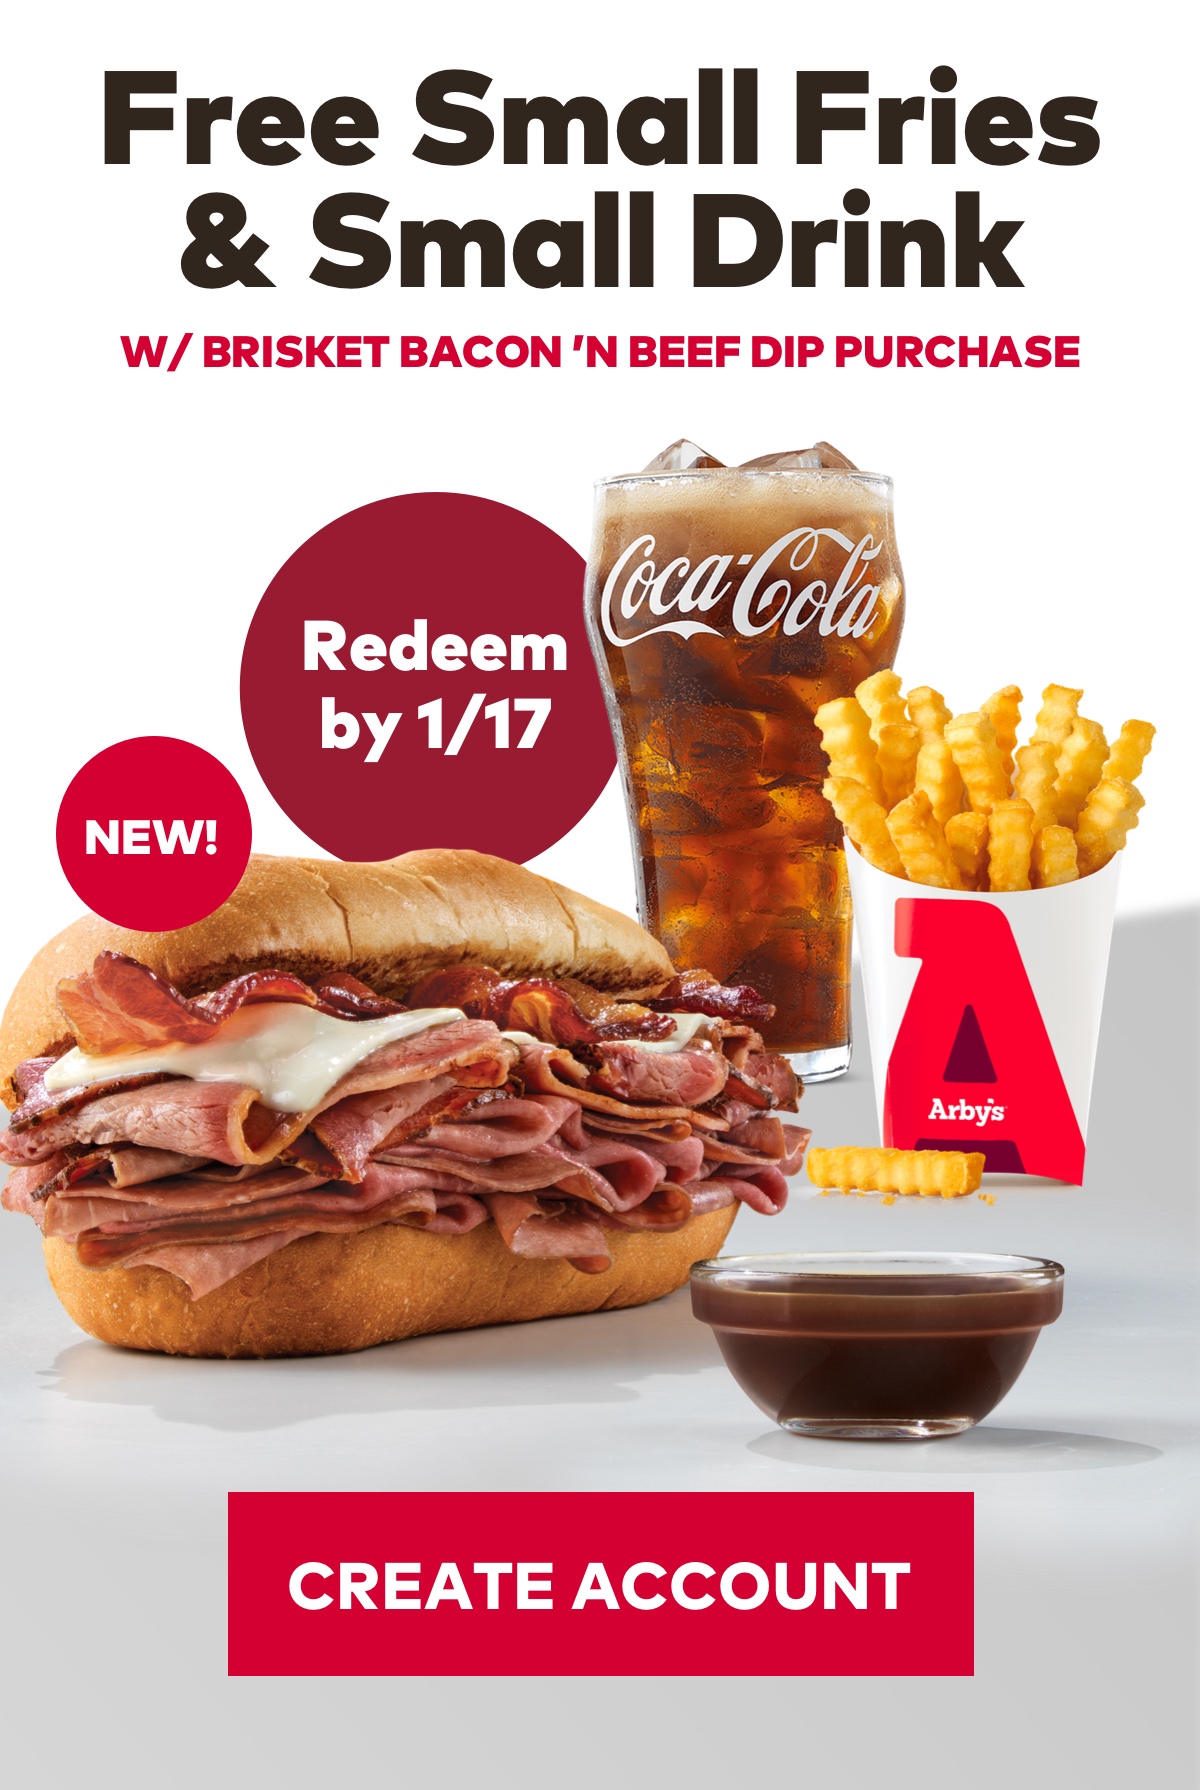 Free Small Fries and Small Drink w/purchase of the Brisket Bacon 'n Beef Dip through 1/17.